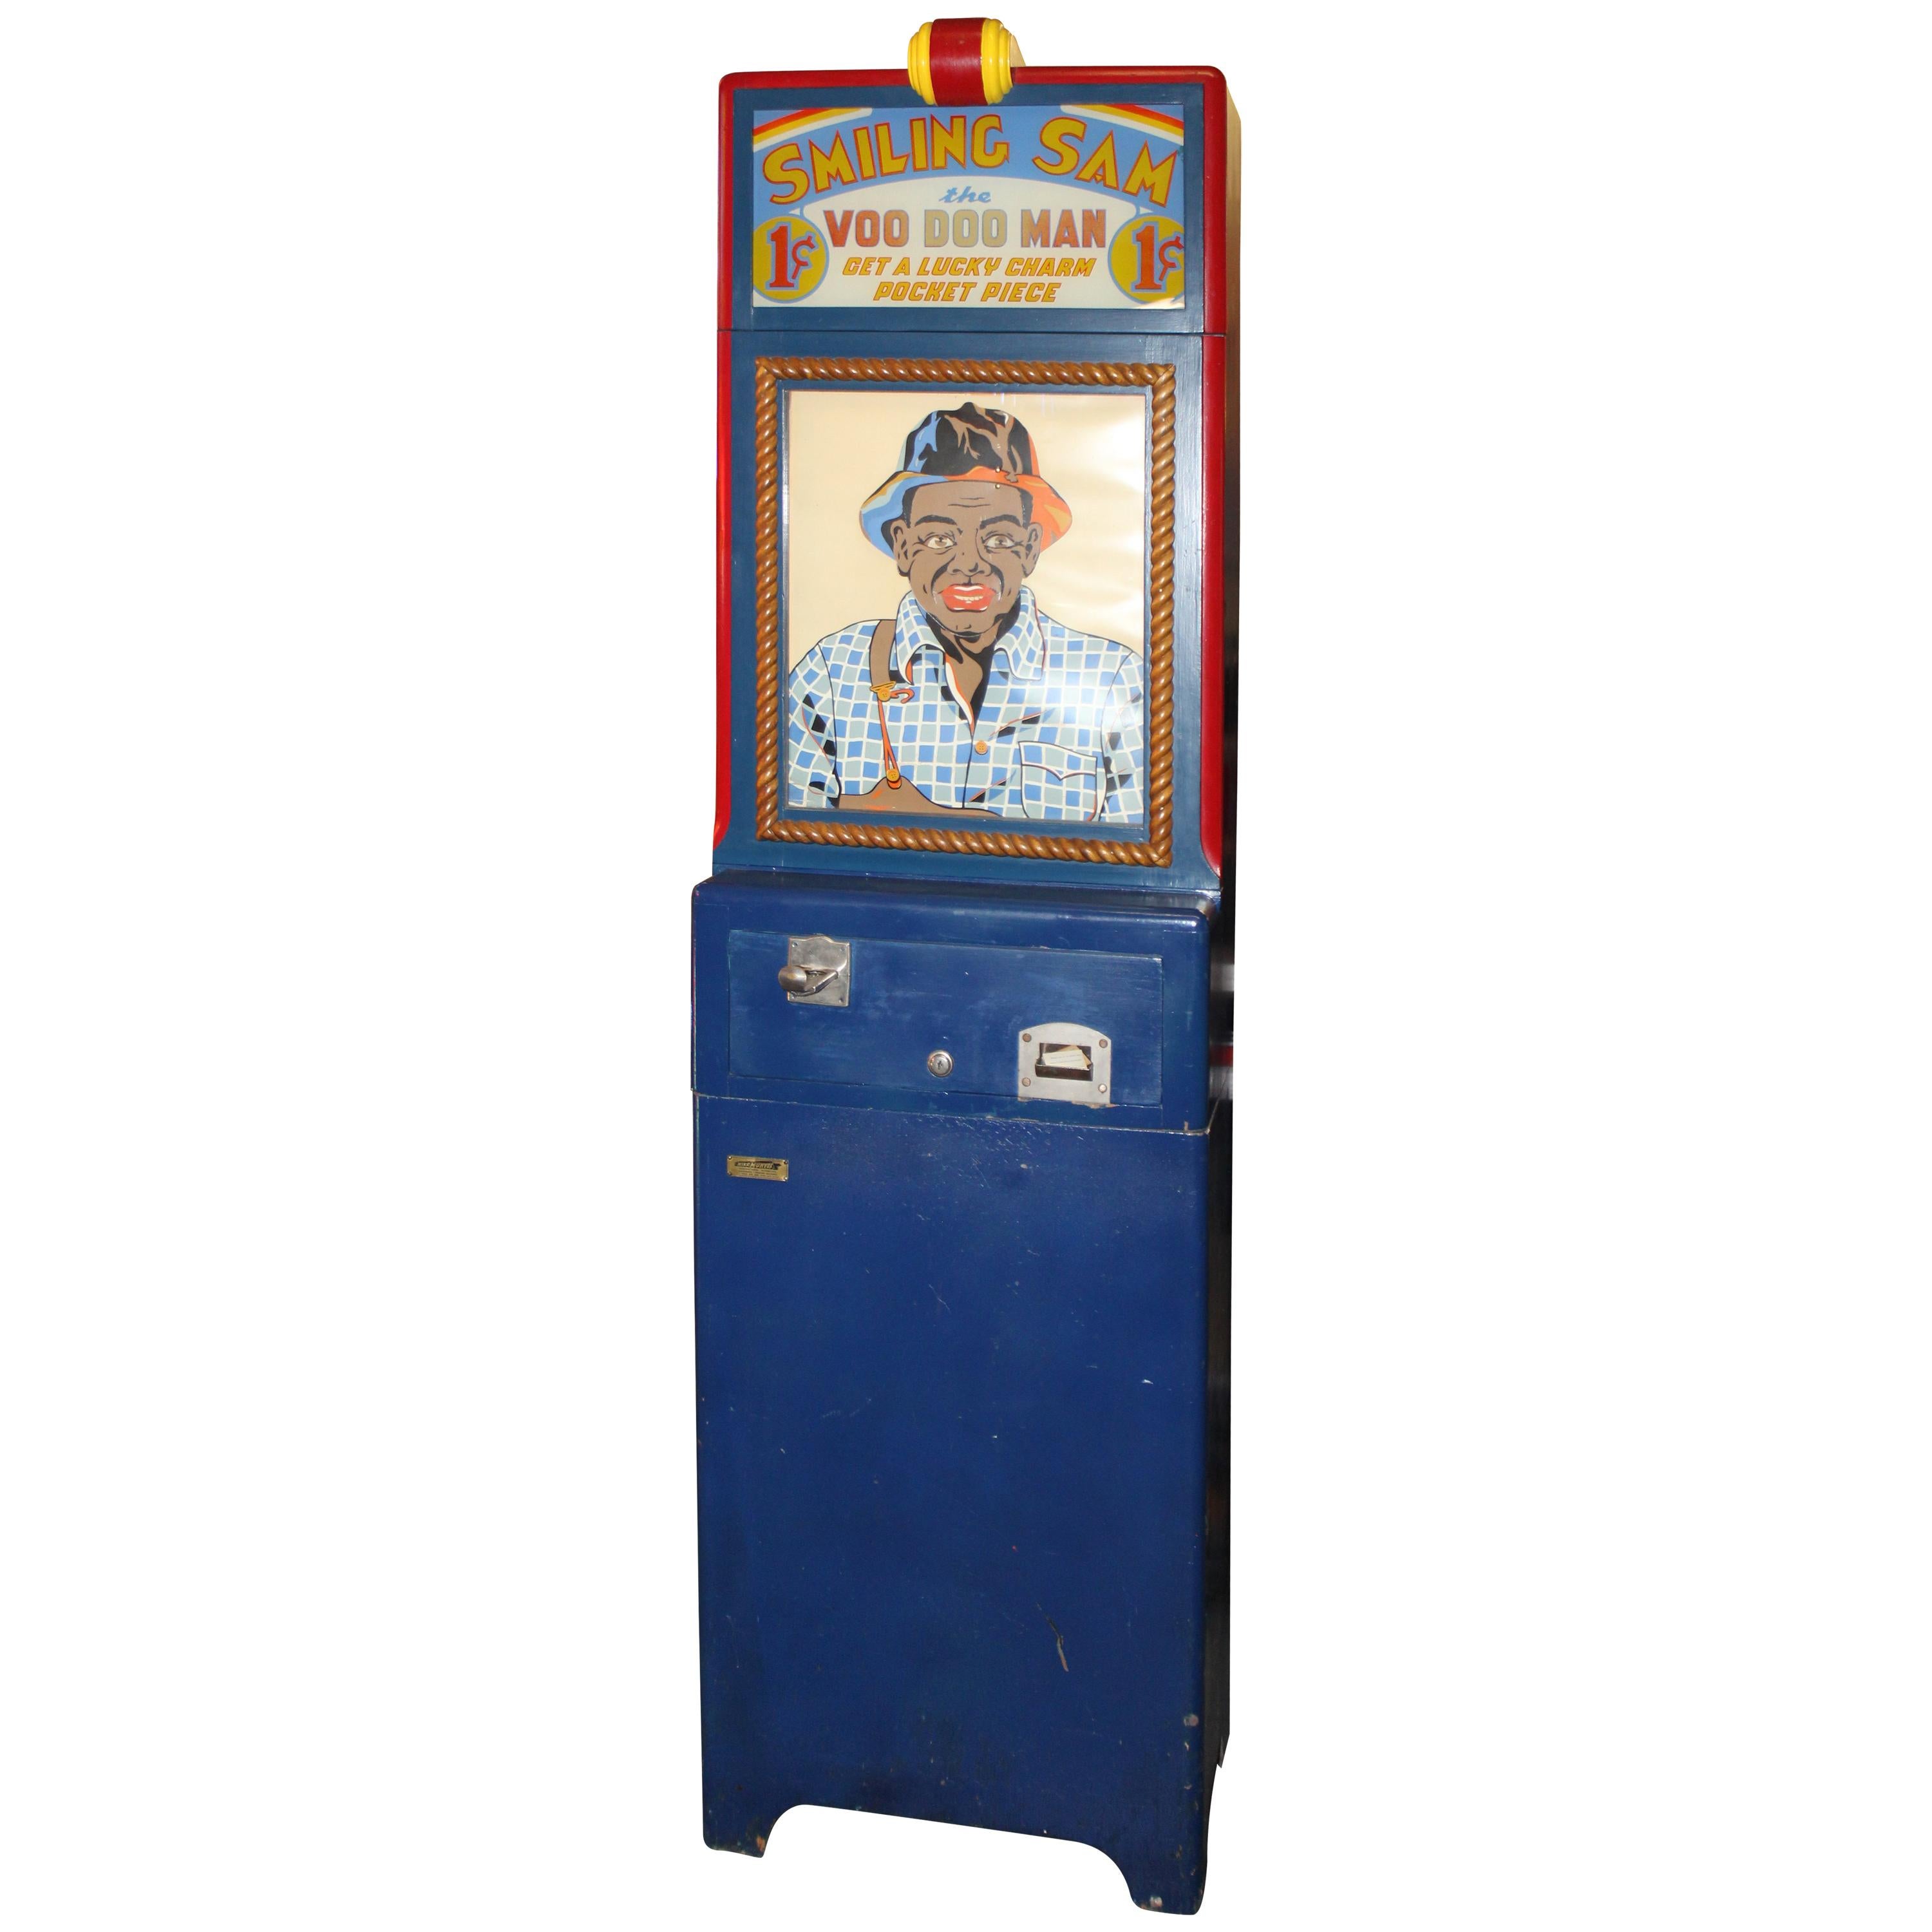 1939 Smiling Sam The Voo Doo Man Coin Op Fortune Machine For Sale